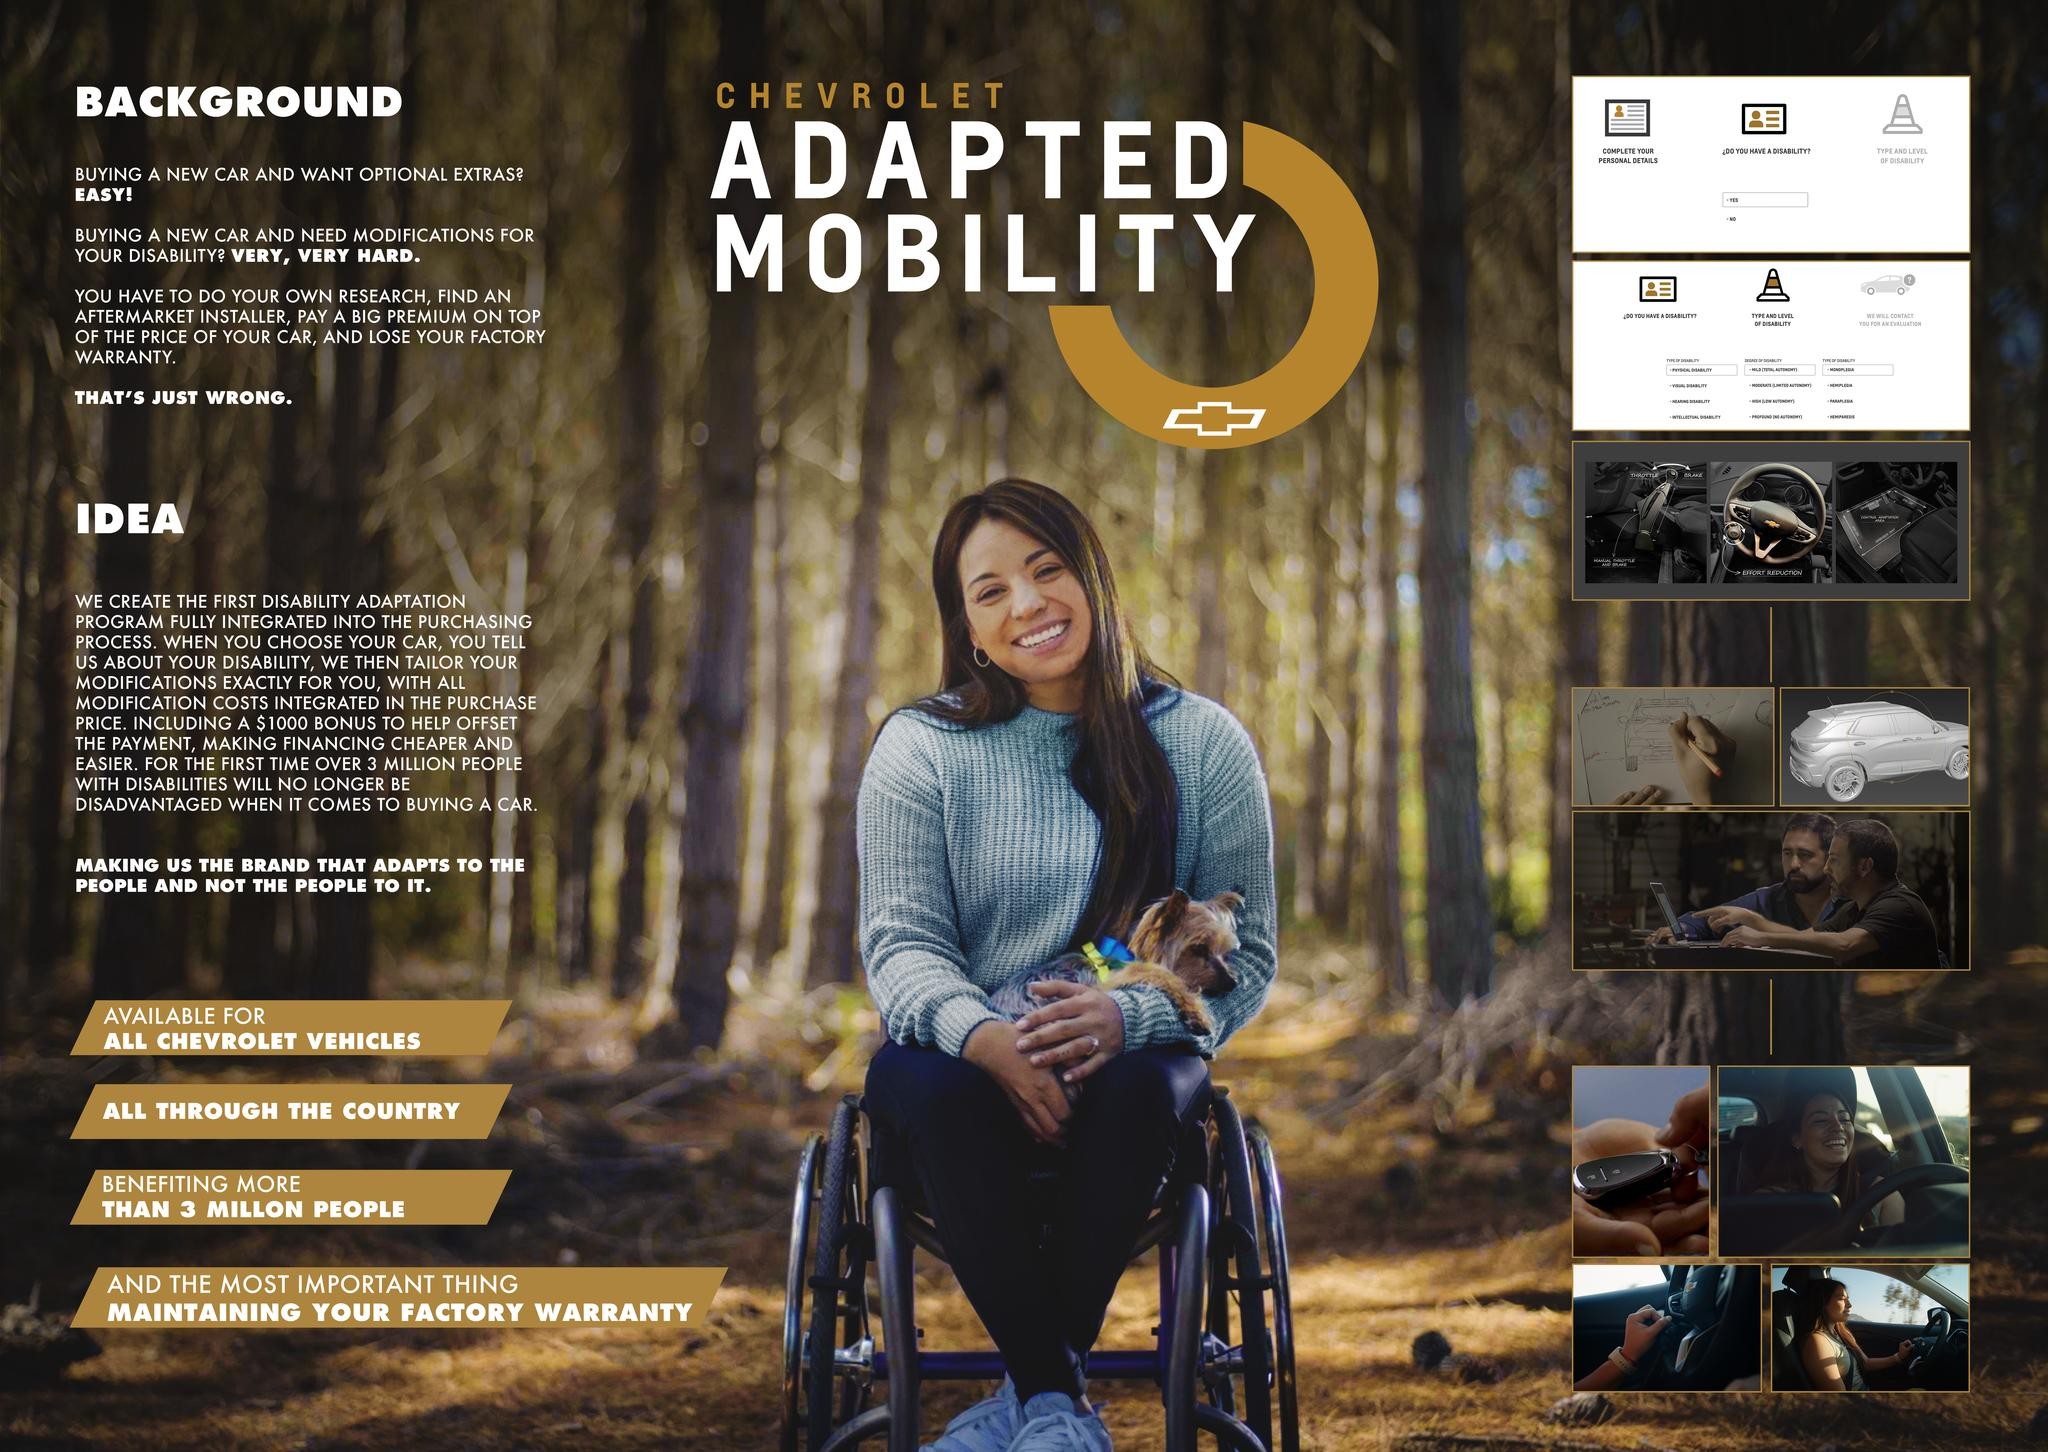 Chevrolet Adaptive Mobility